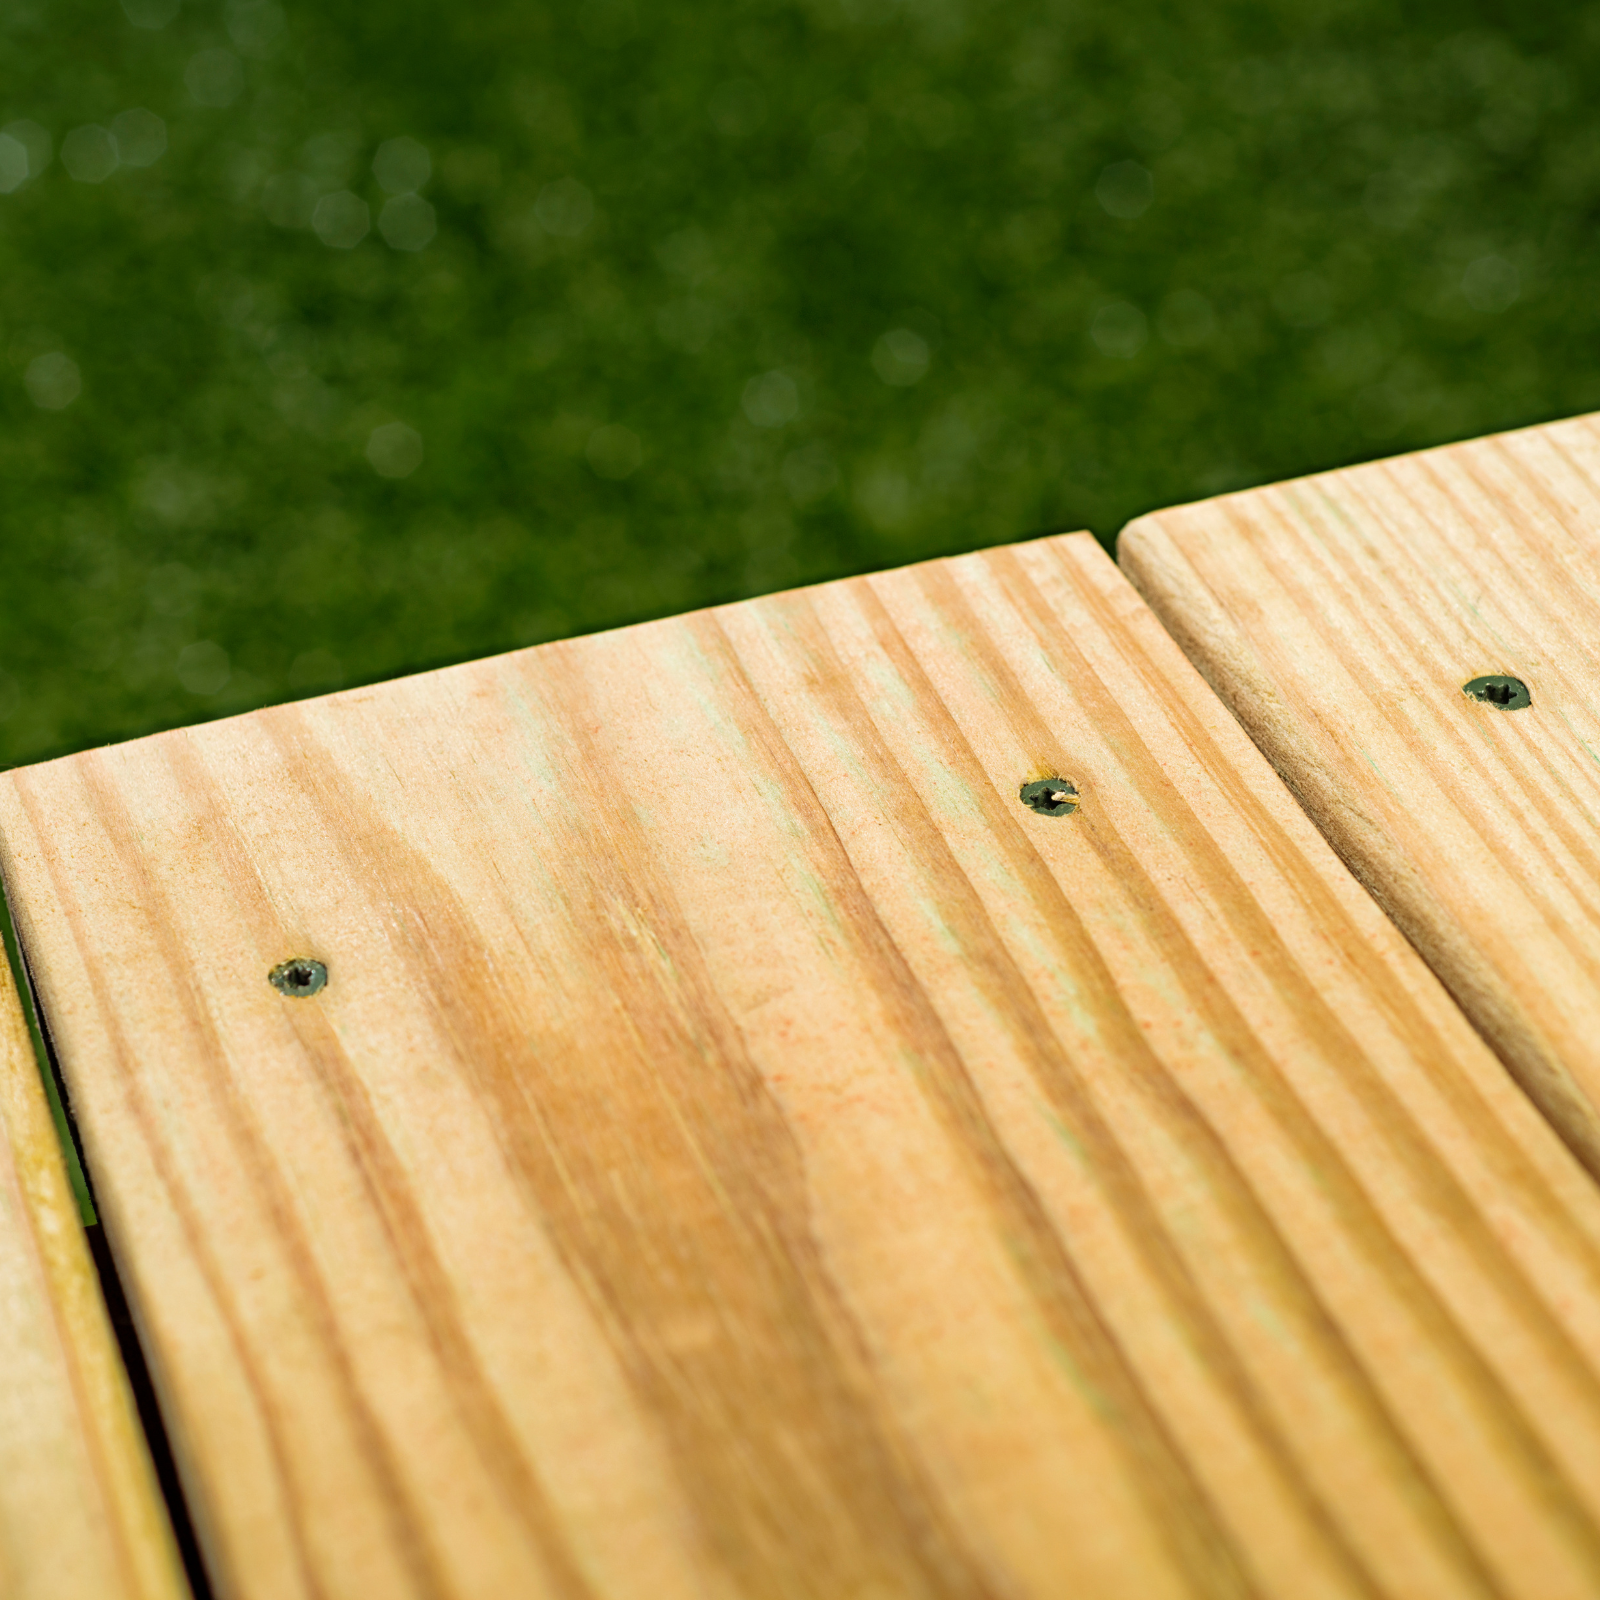 can you use stainless steel screws in pressure treated wood?